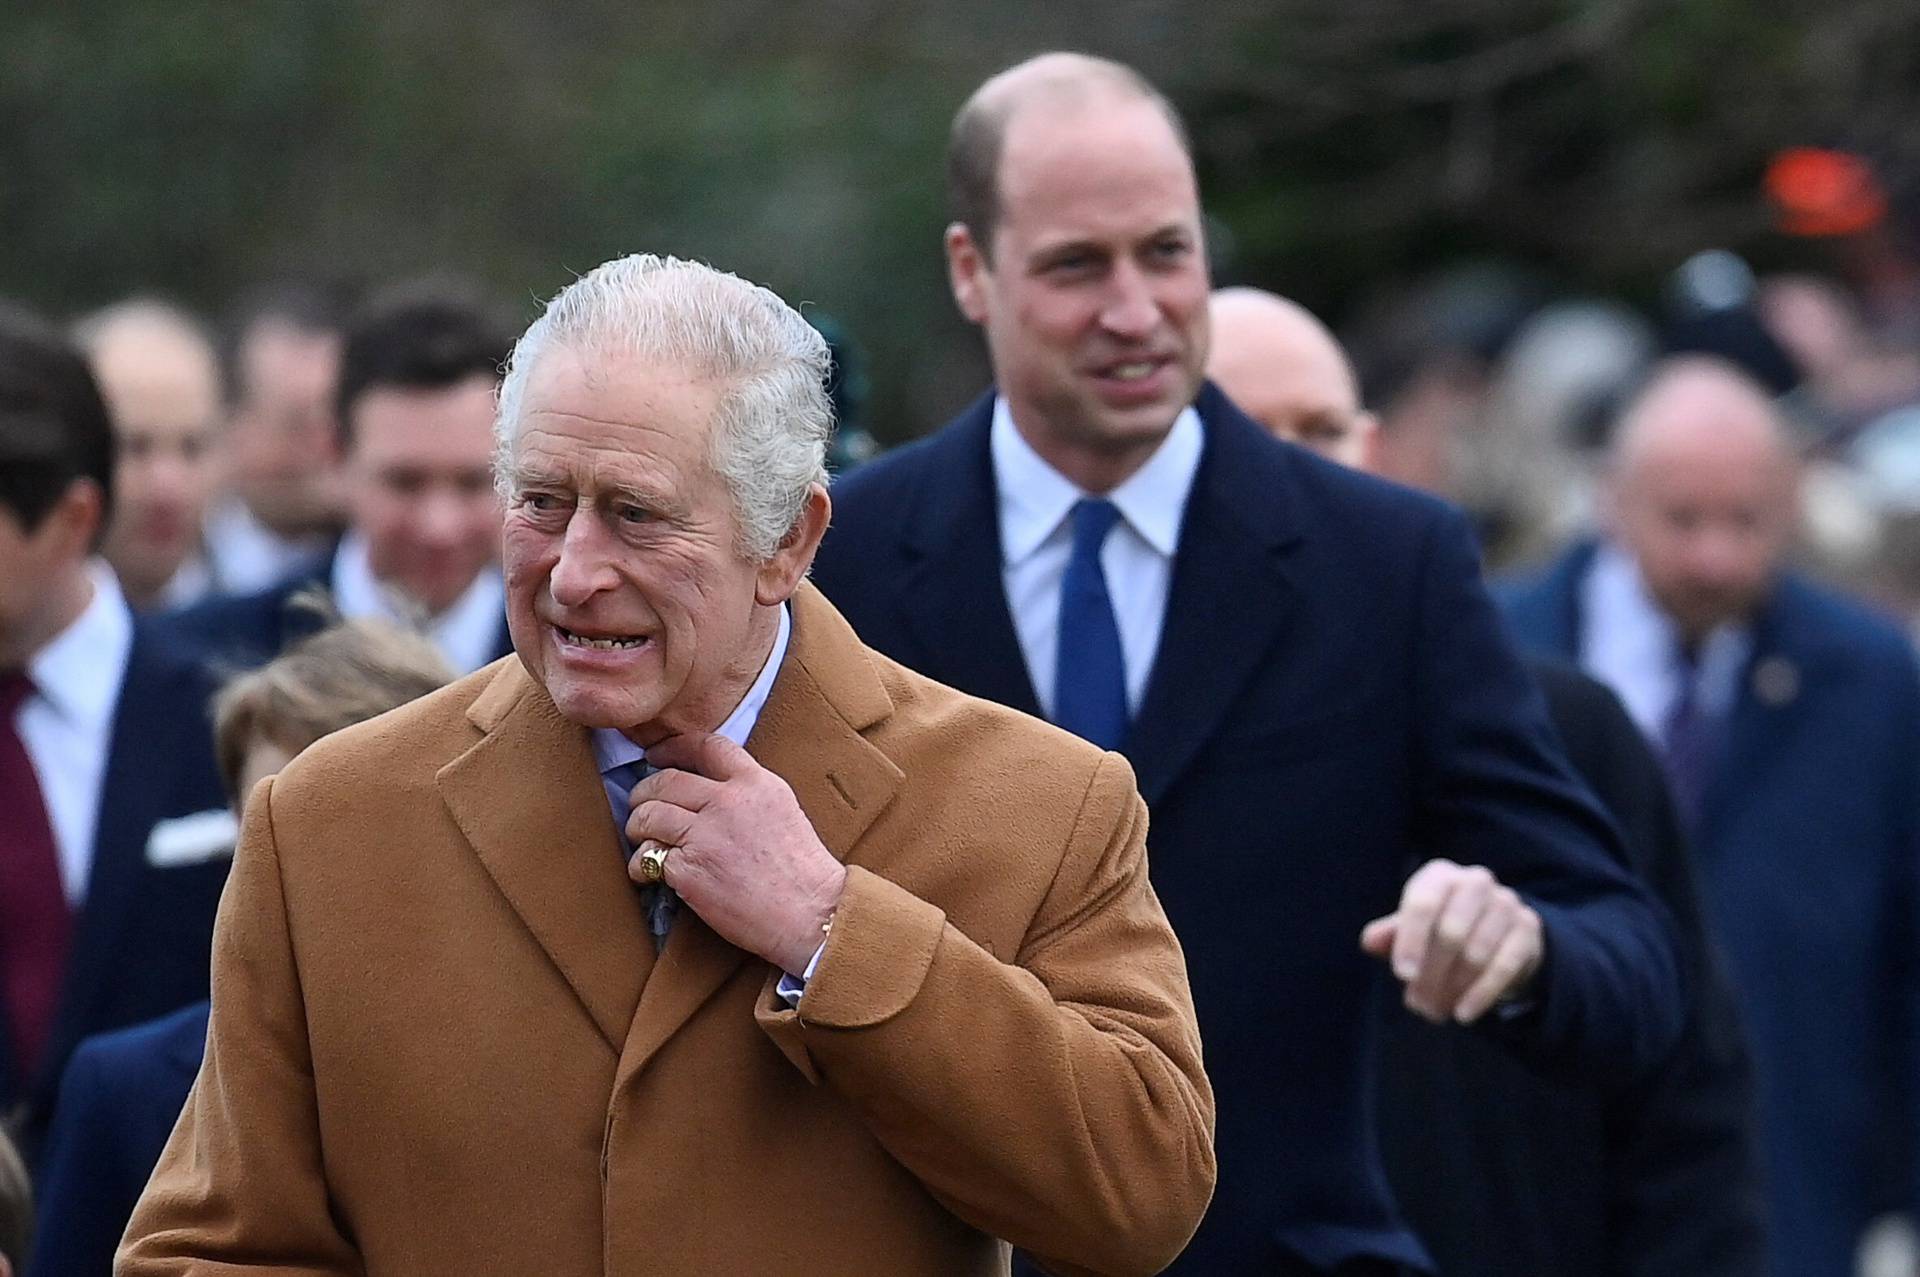 Royal Family's Christmas Day service at the Sandringham estate